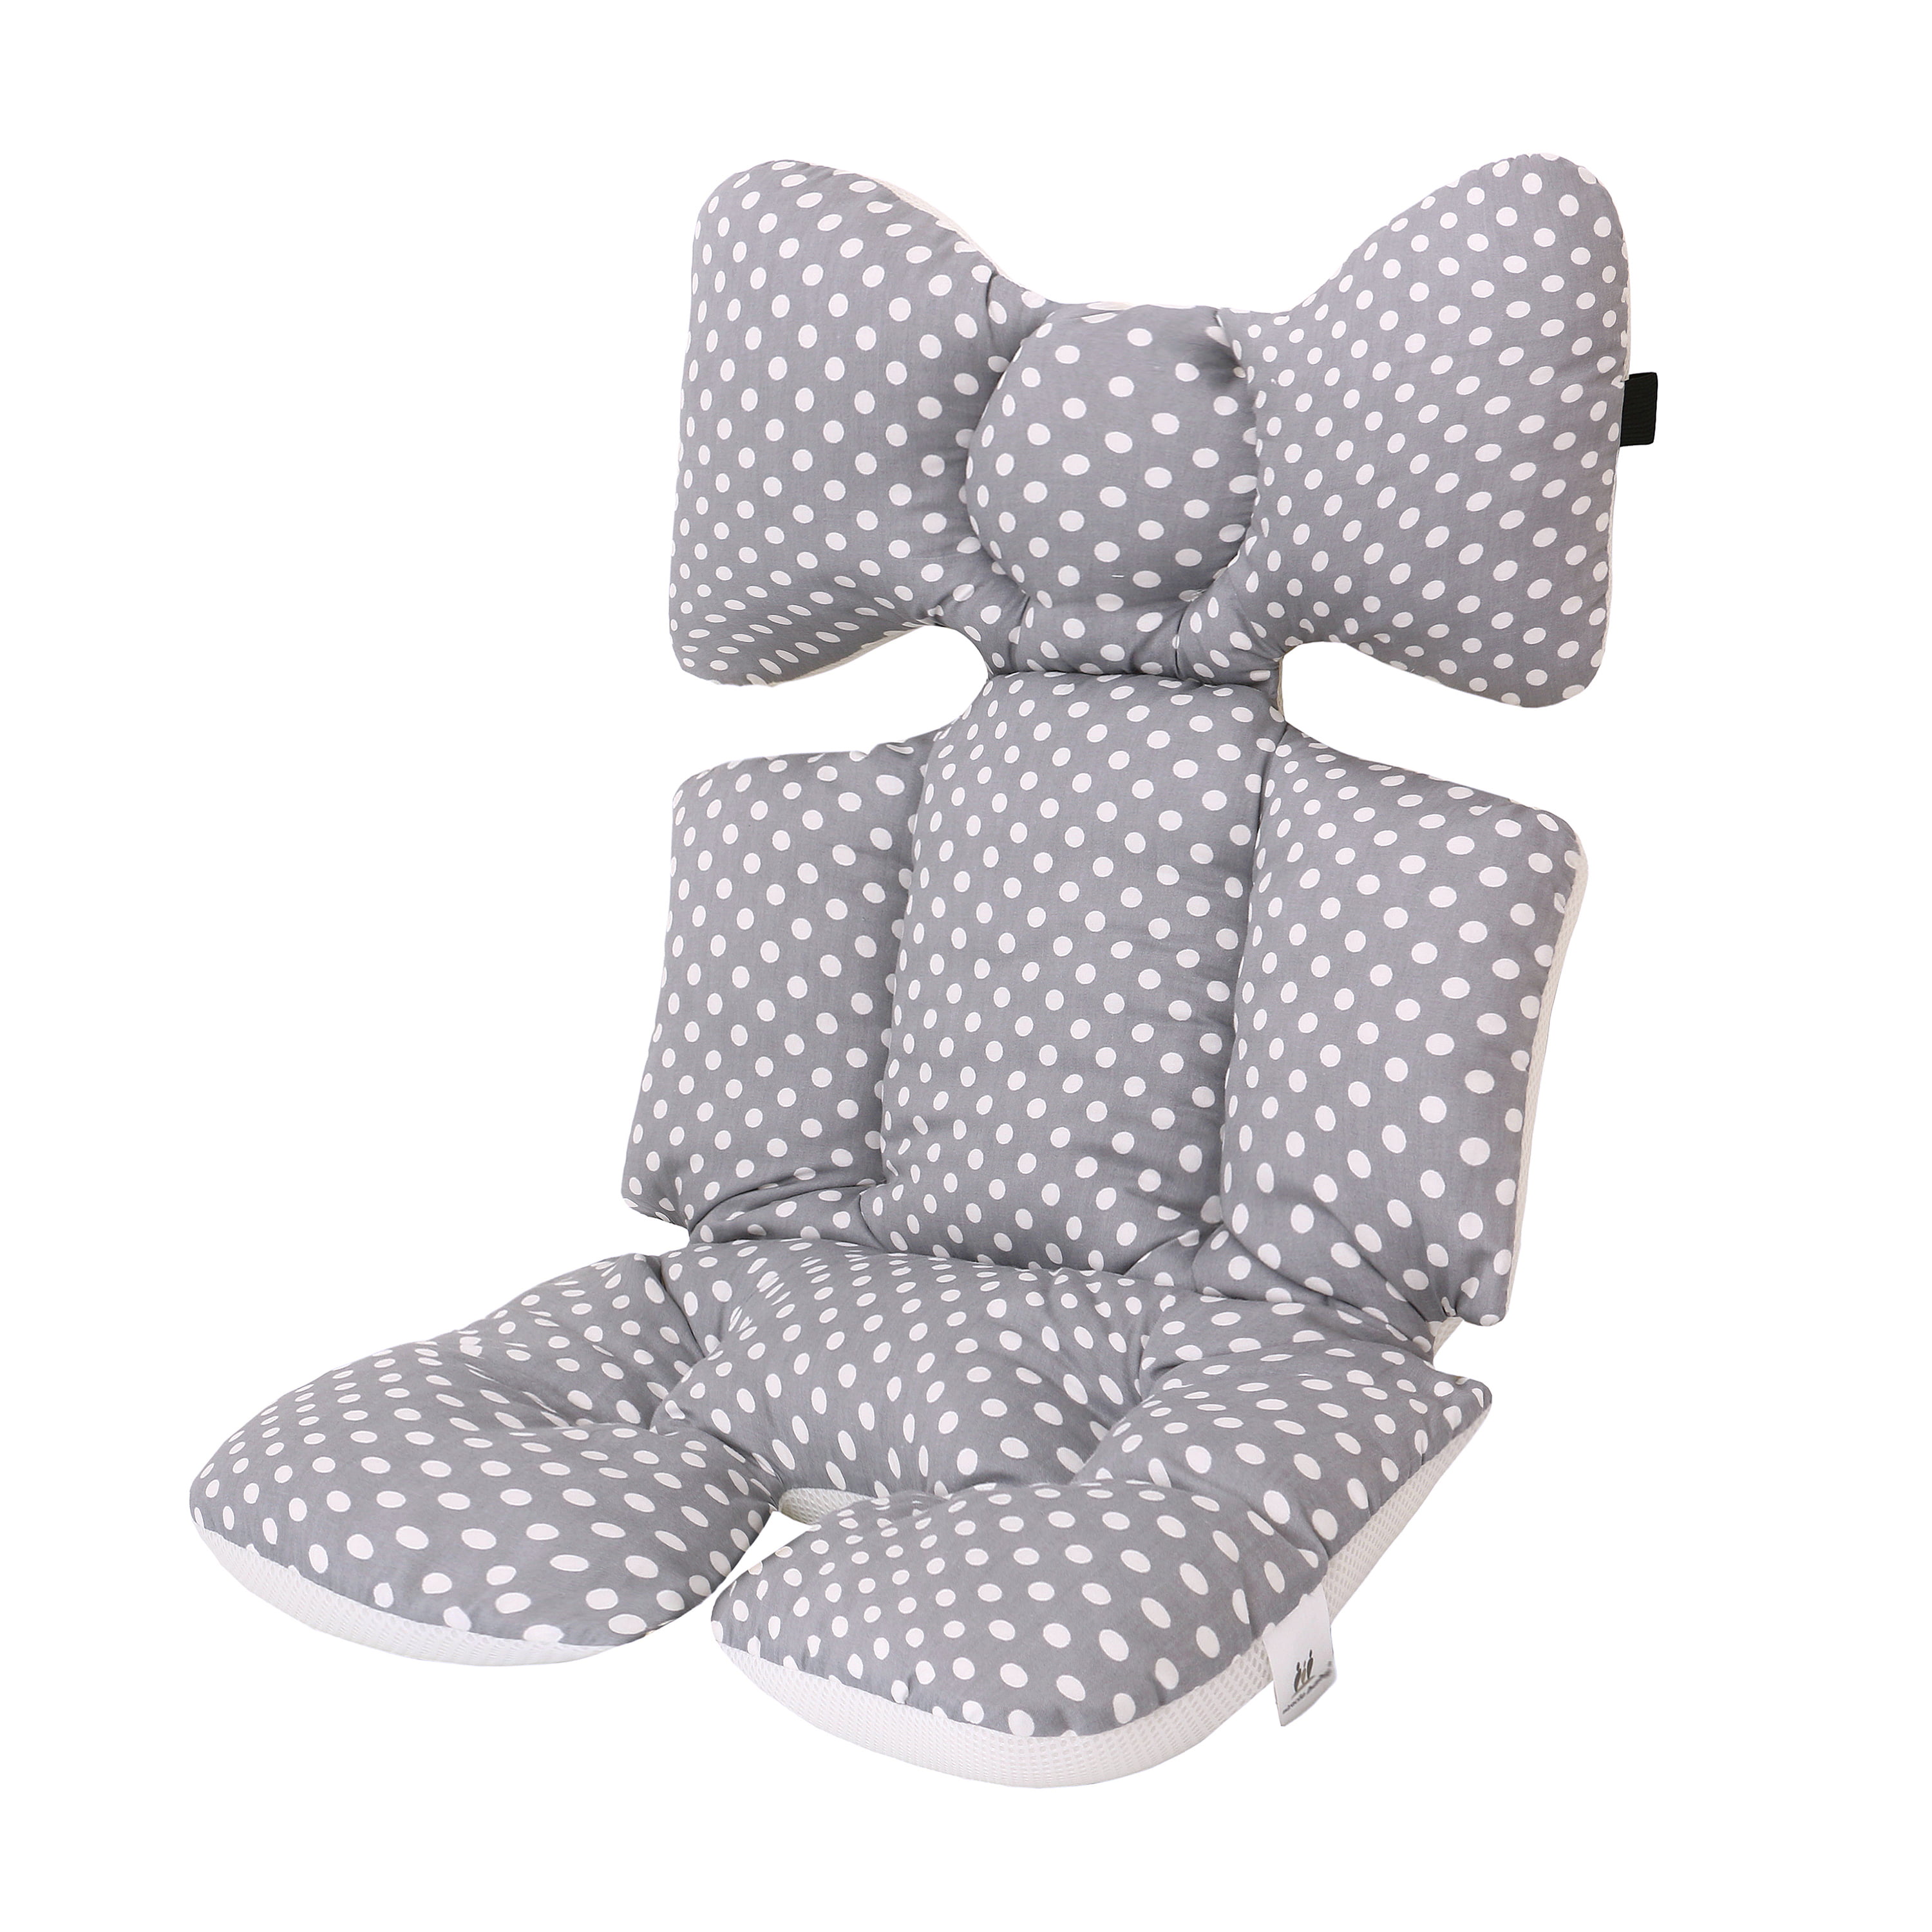 Star Baby Seat Pad Liner for Stroller Breathable 3D Air Mesh Cotton Cushion Pad 